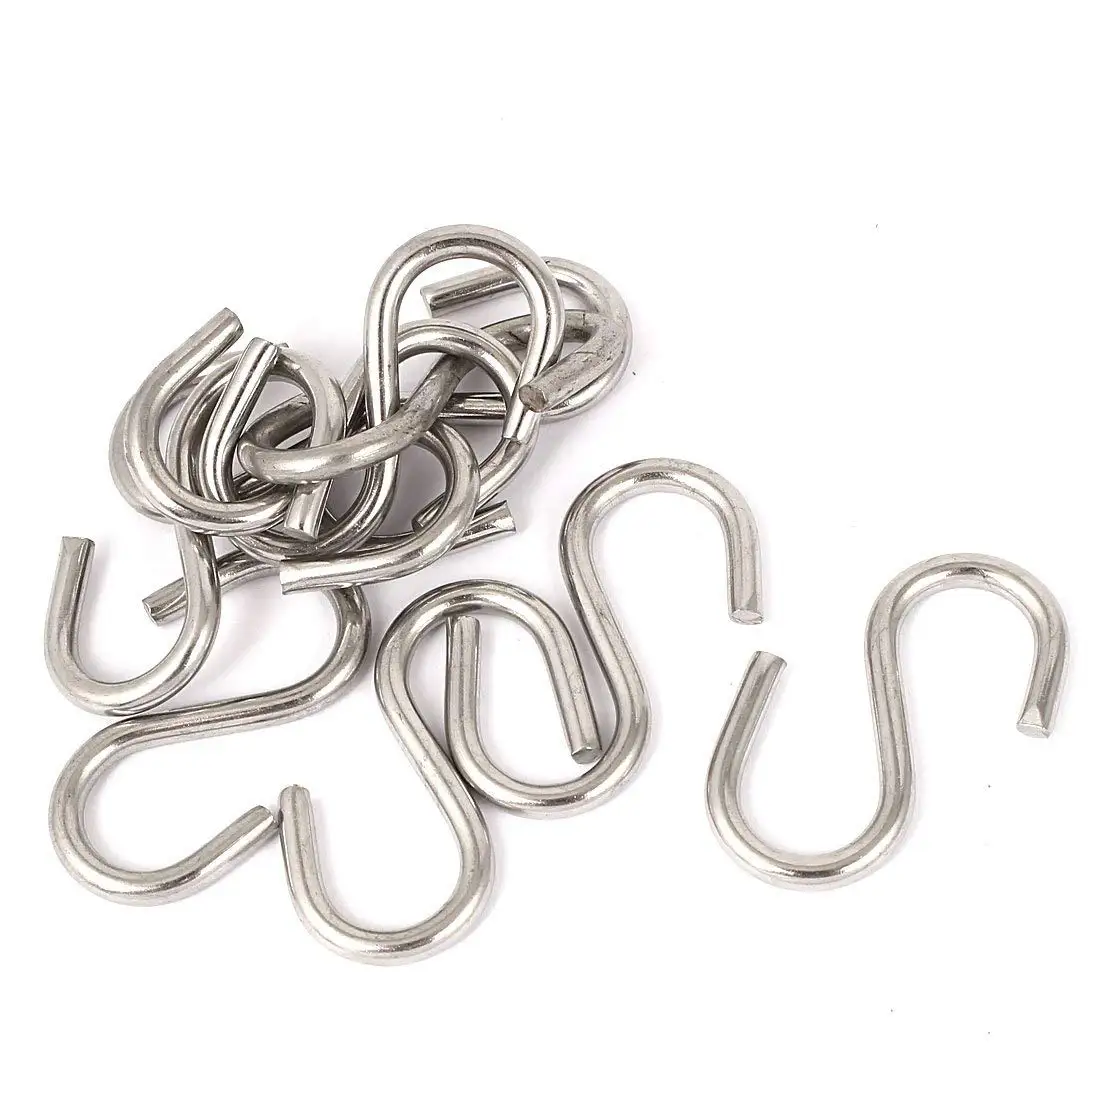 Buy uxcell 4mm Thickness 201 Stainless Steel S Shaped Hook Hanger 10 ...